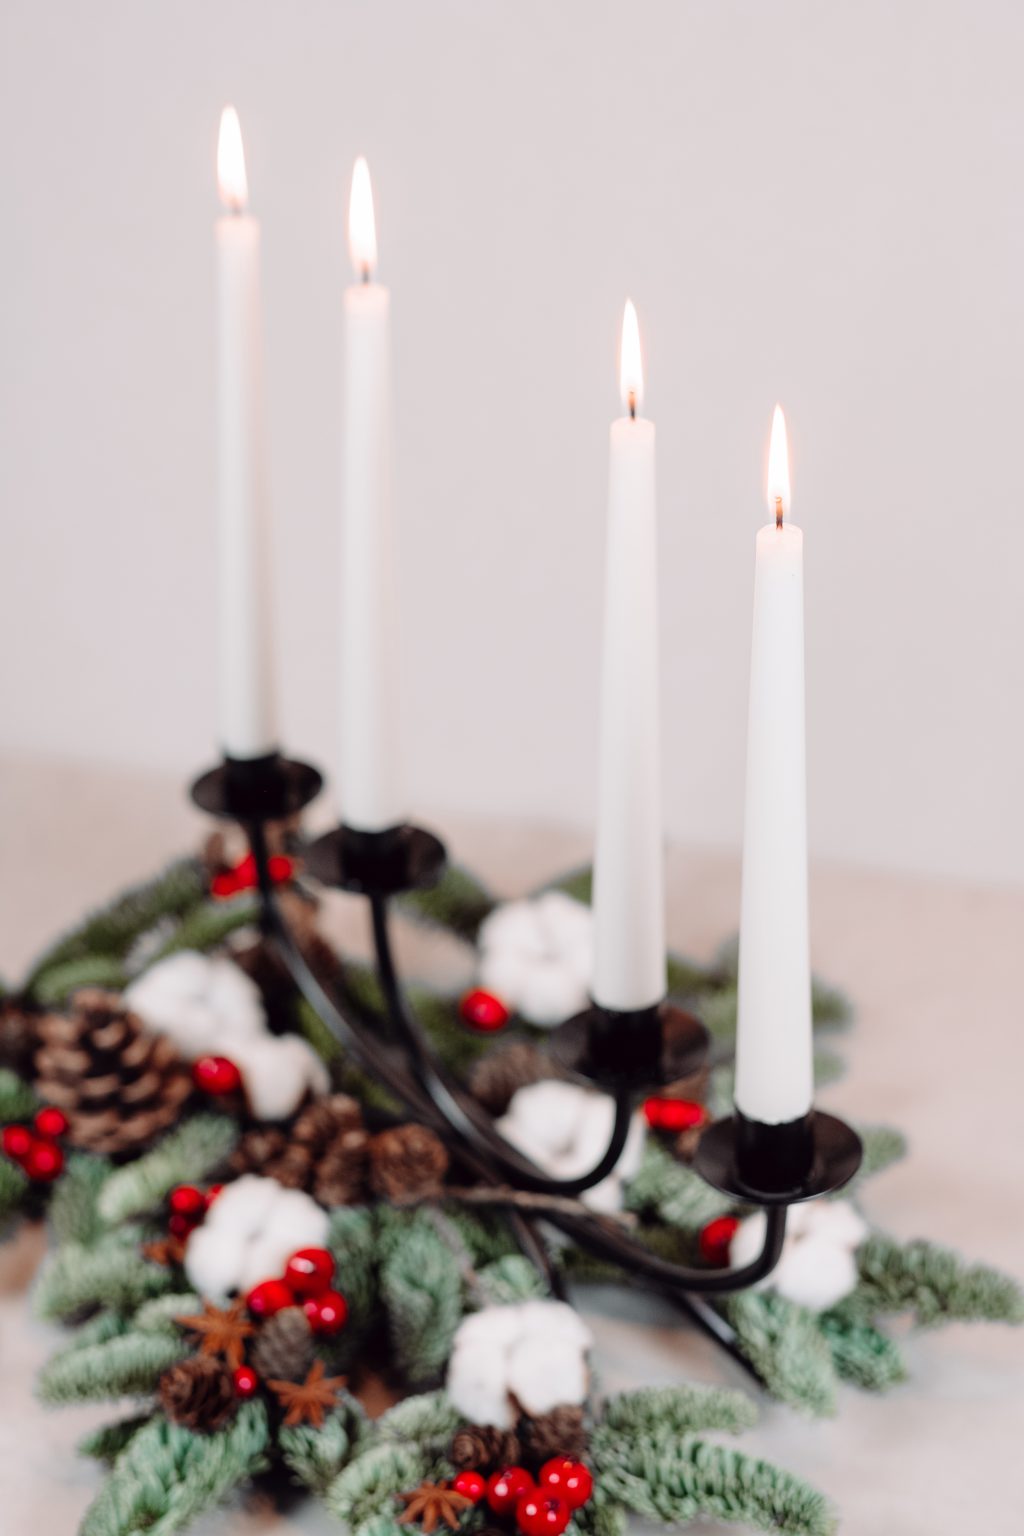 Christmas spruce decoration with candles 5 - free stock photo